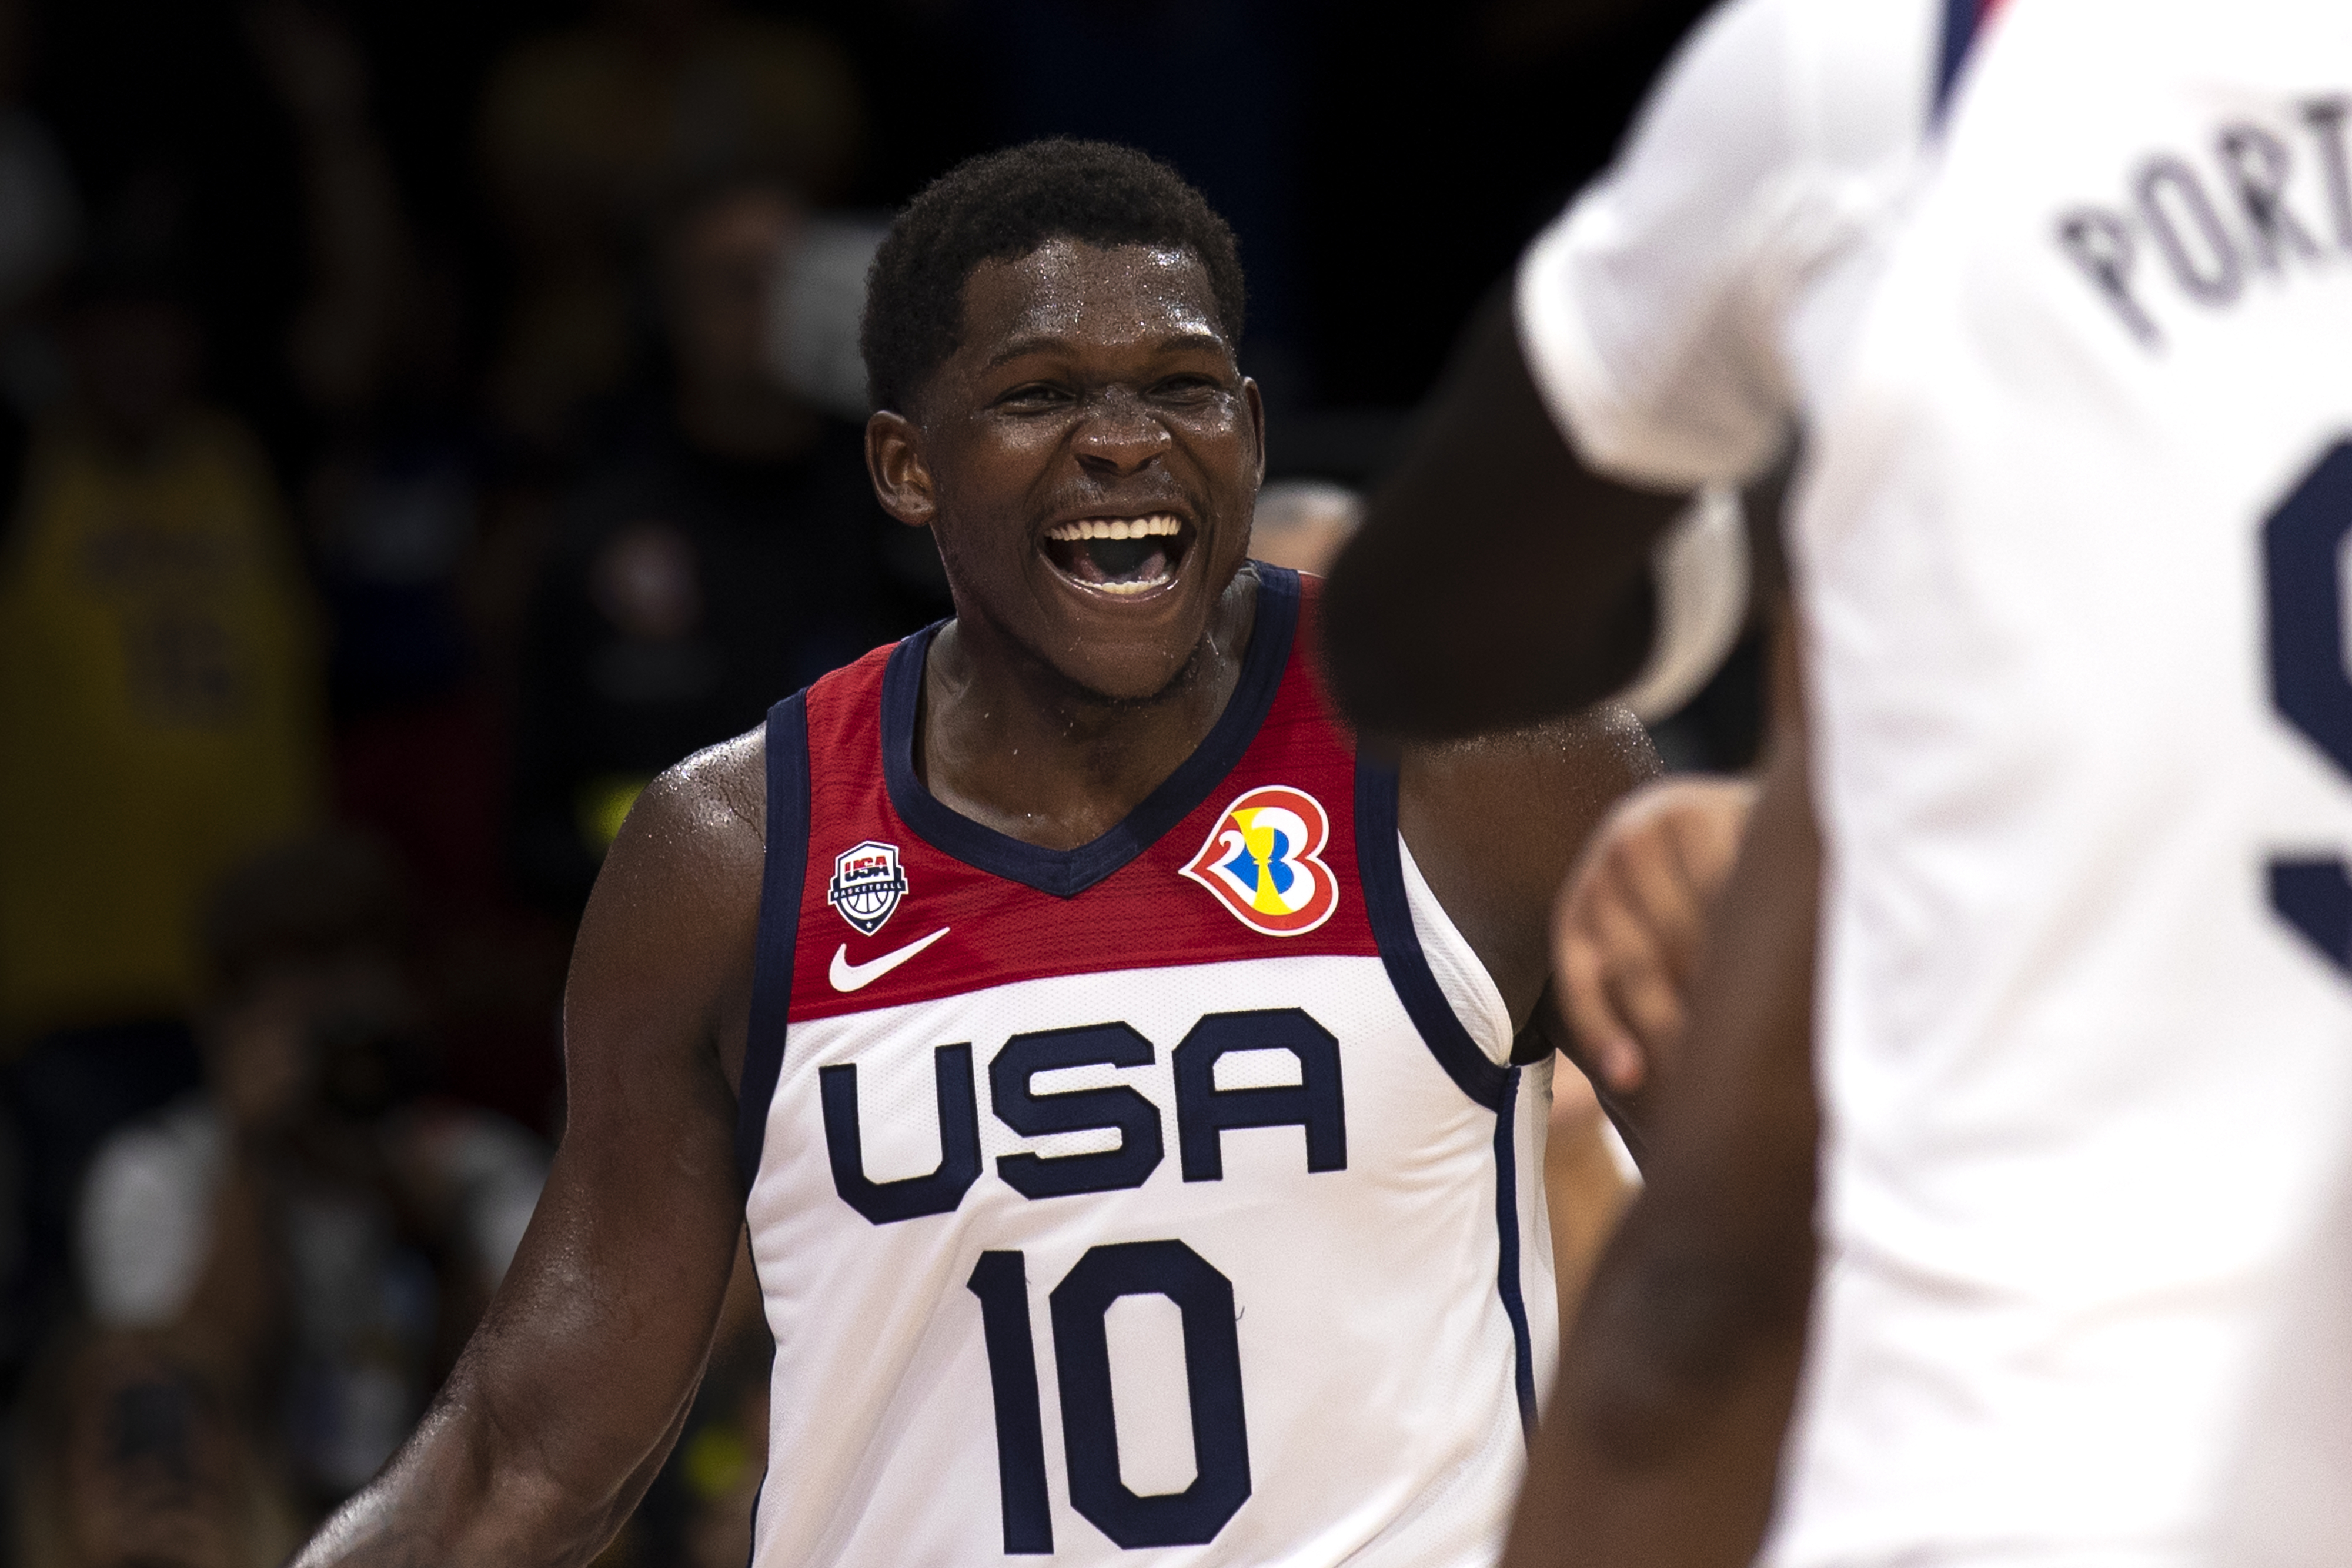 Athlete in USA jersey with number 10 laughs on the basketball court next to a teammate